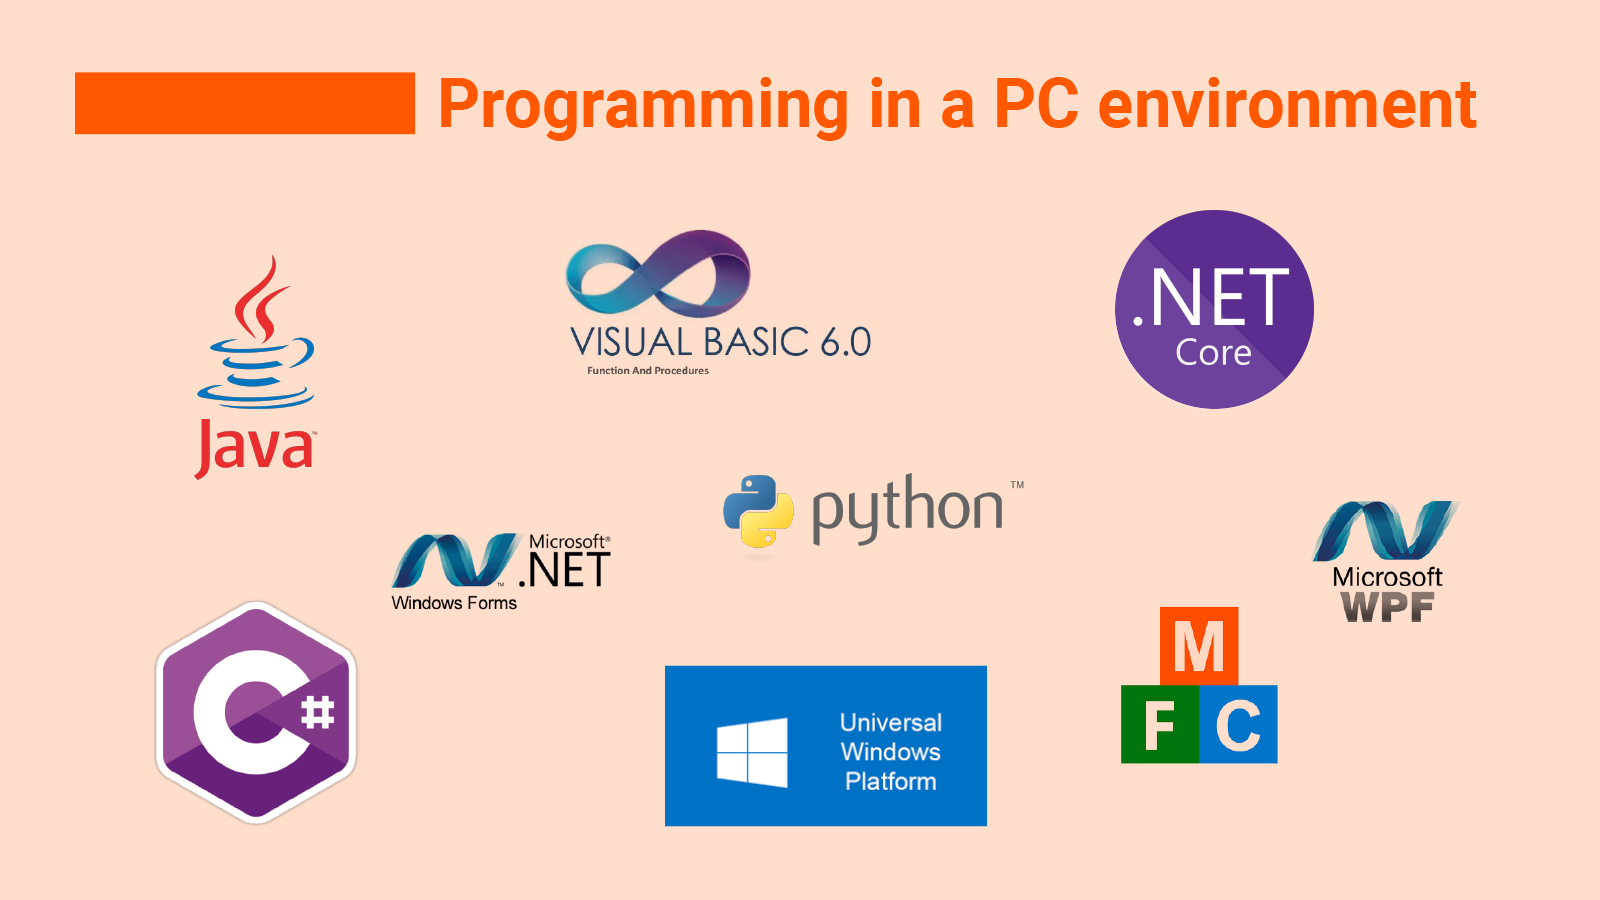 Programming in a PC environment